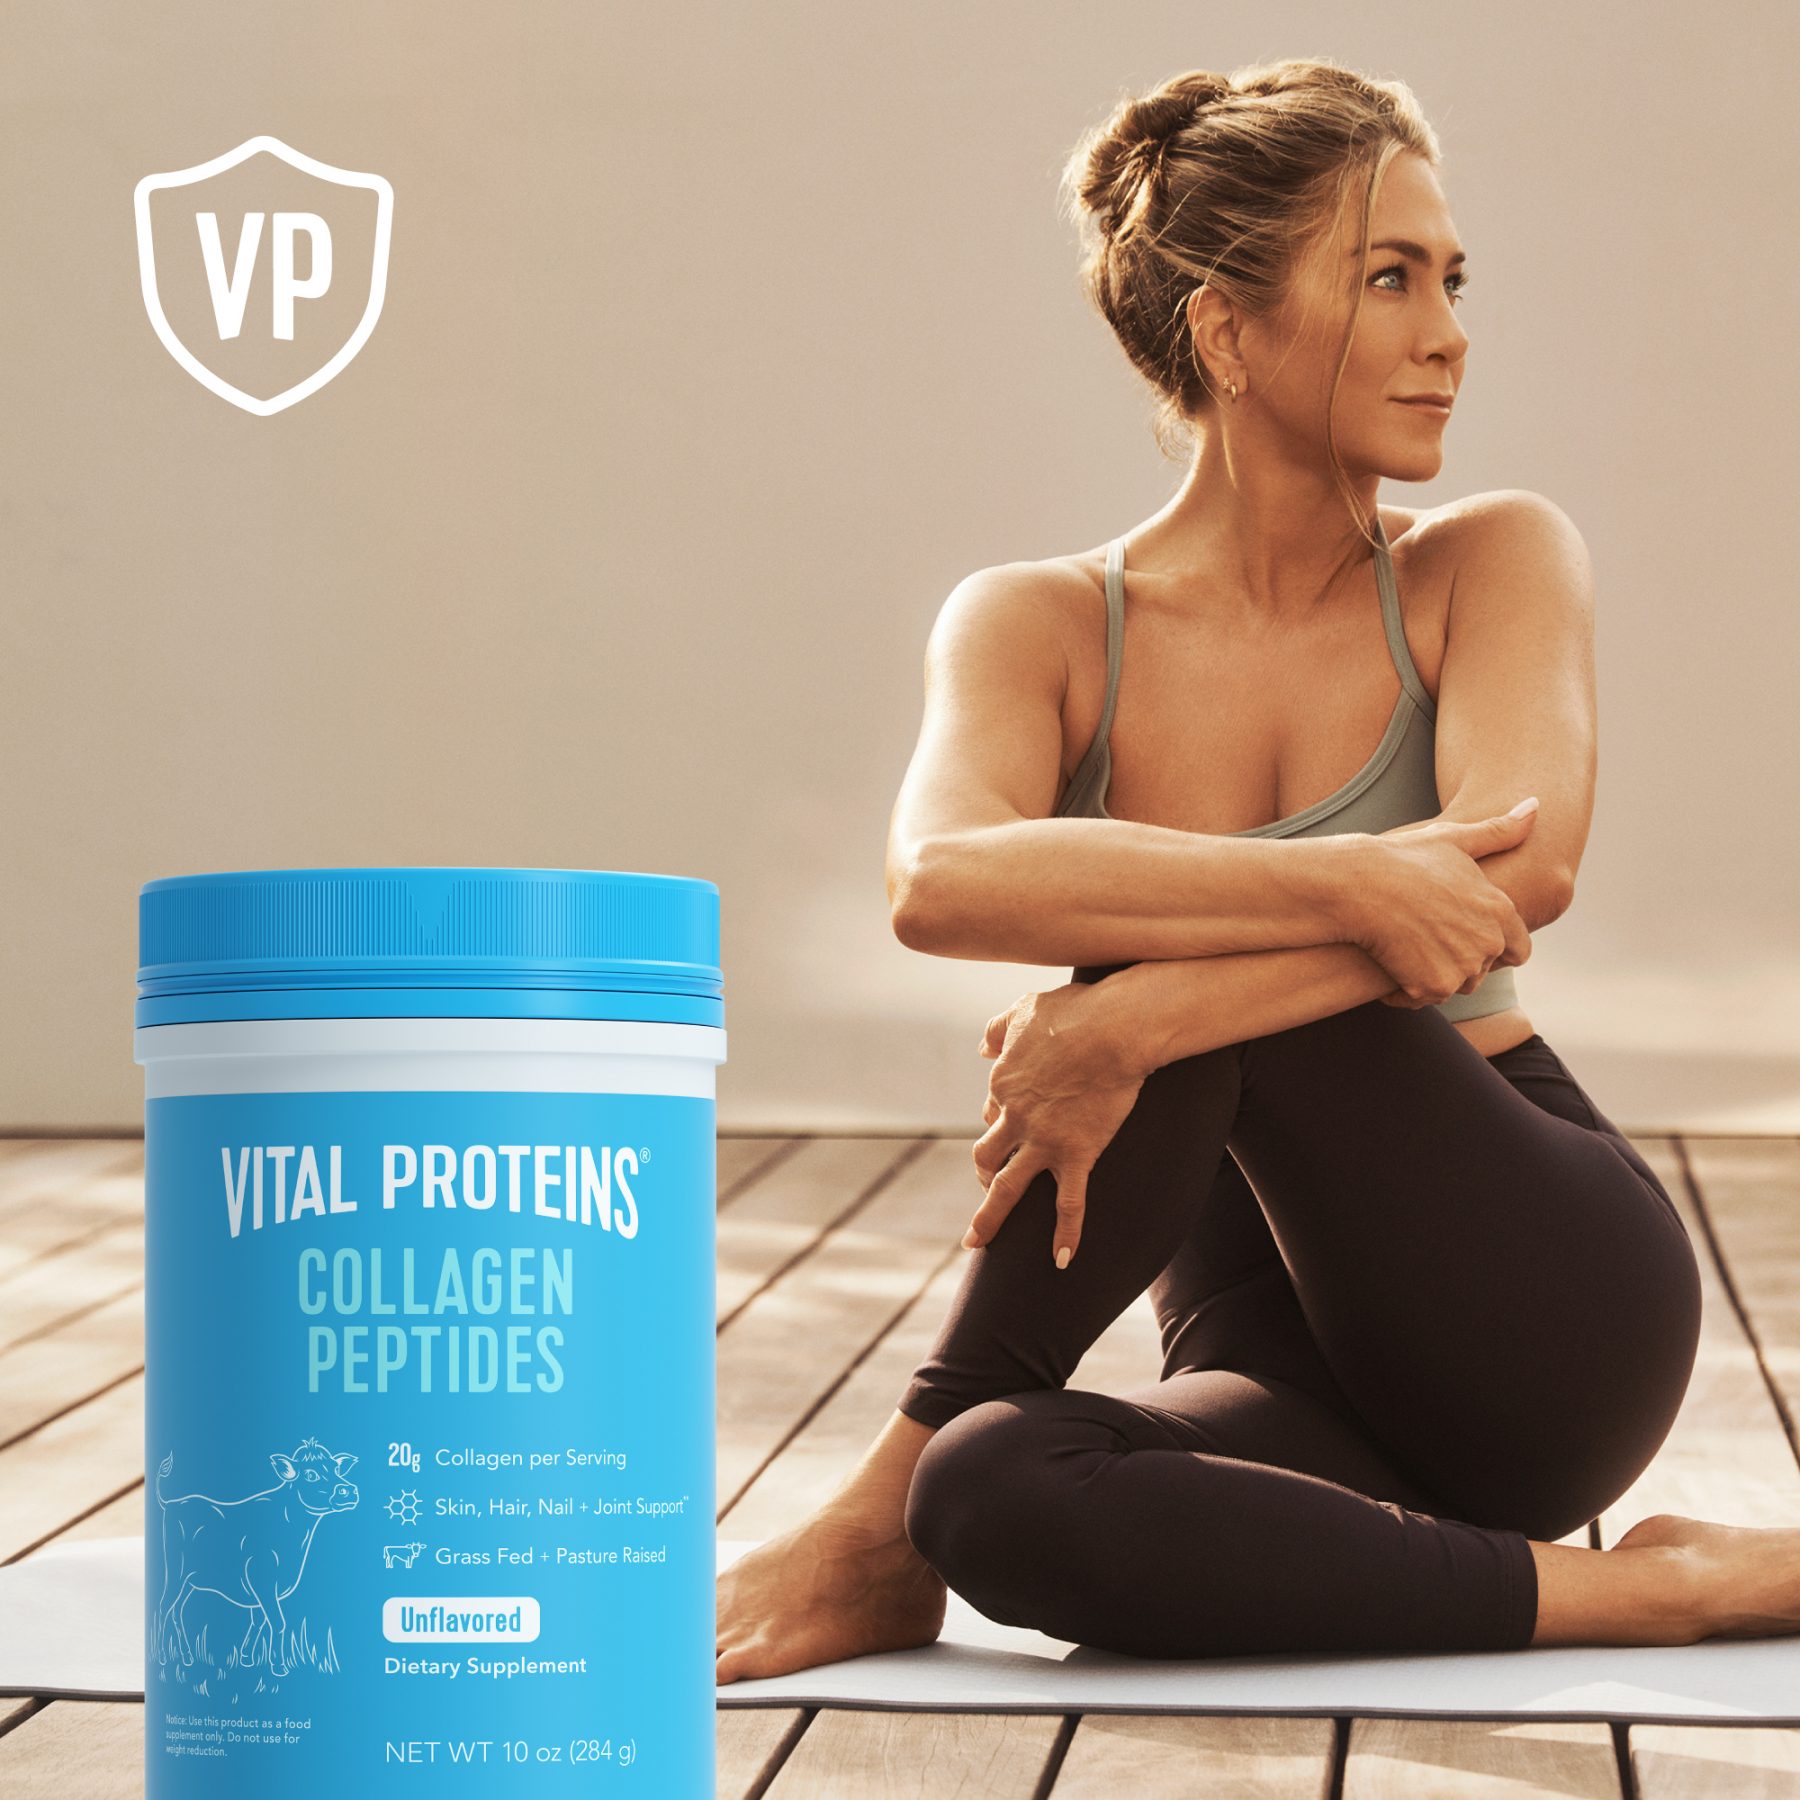 Health and wellness subscription - Vital Proteins